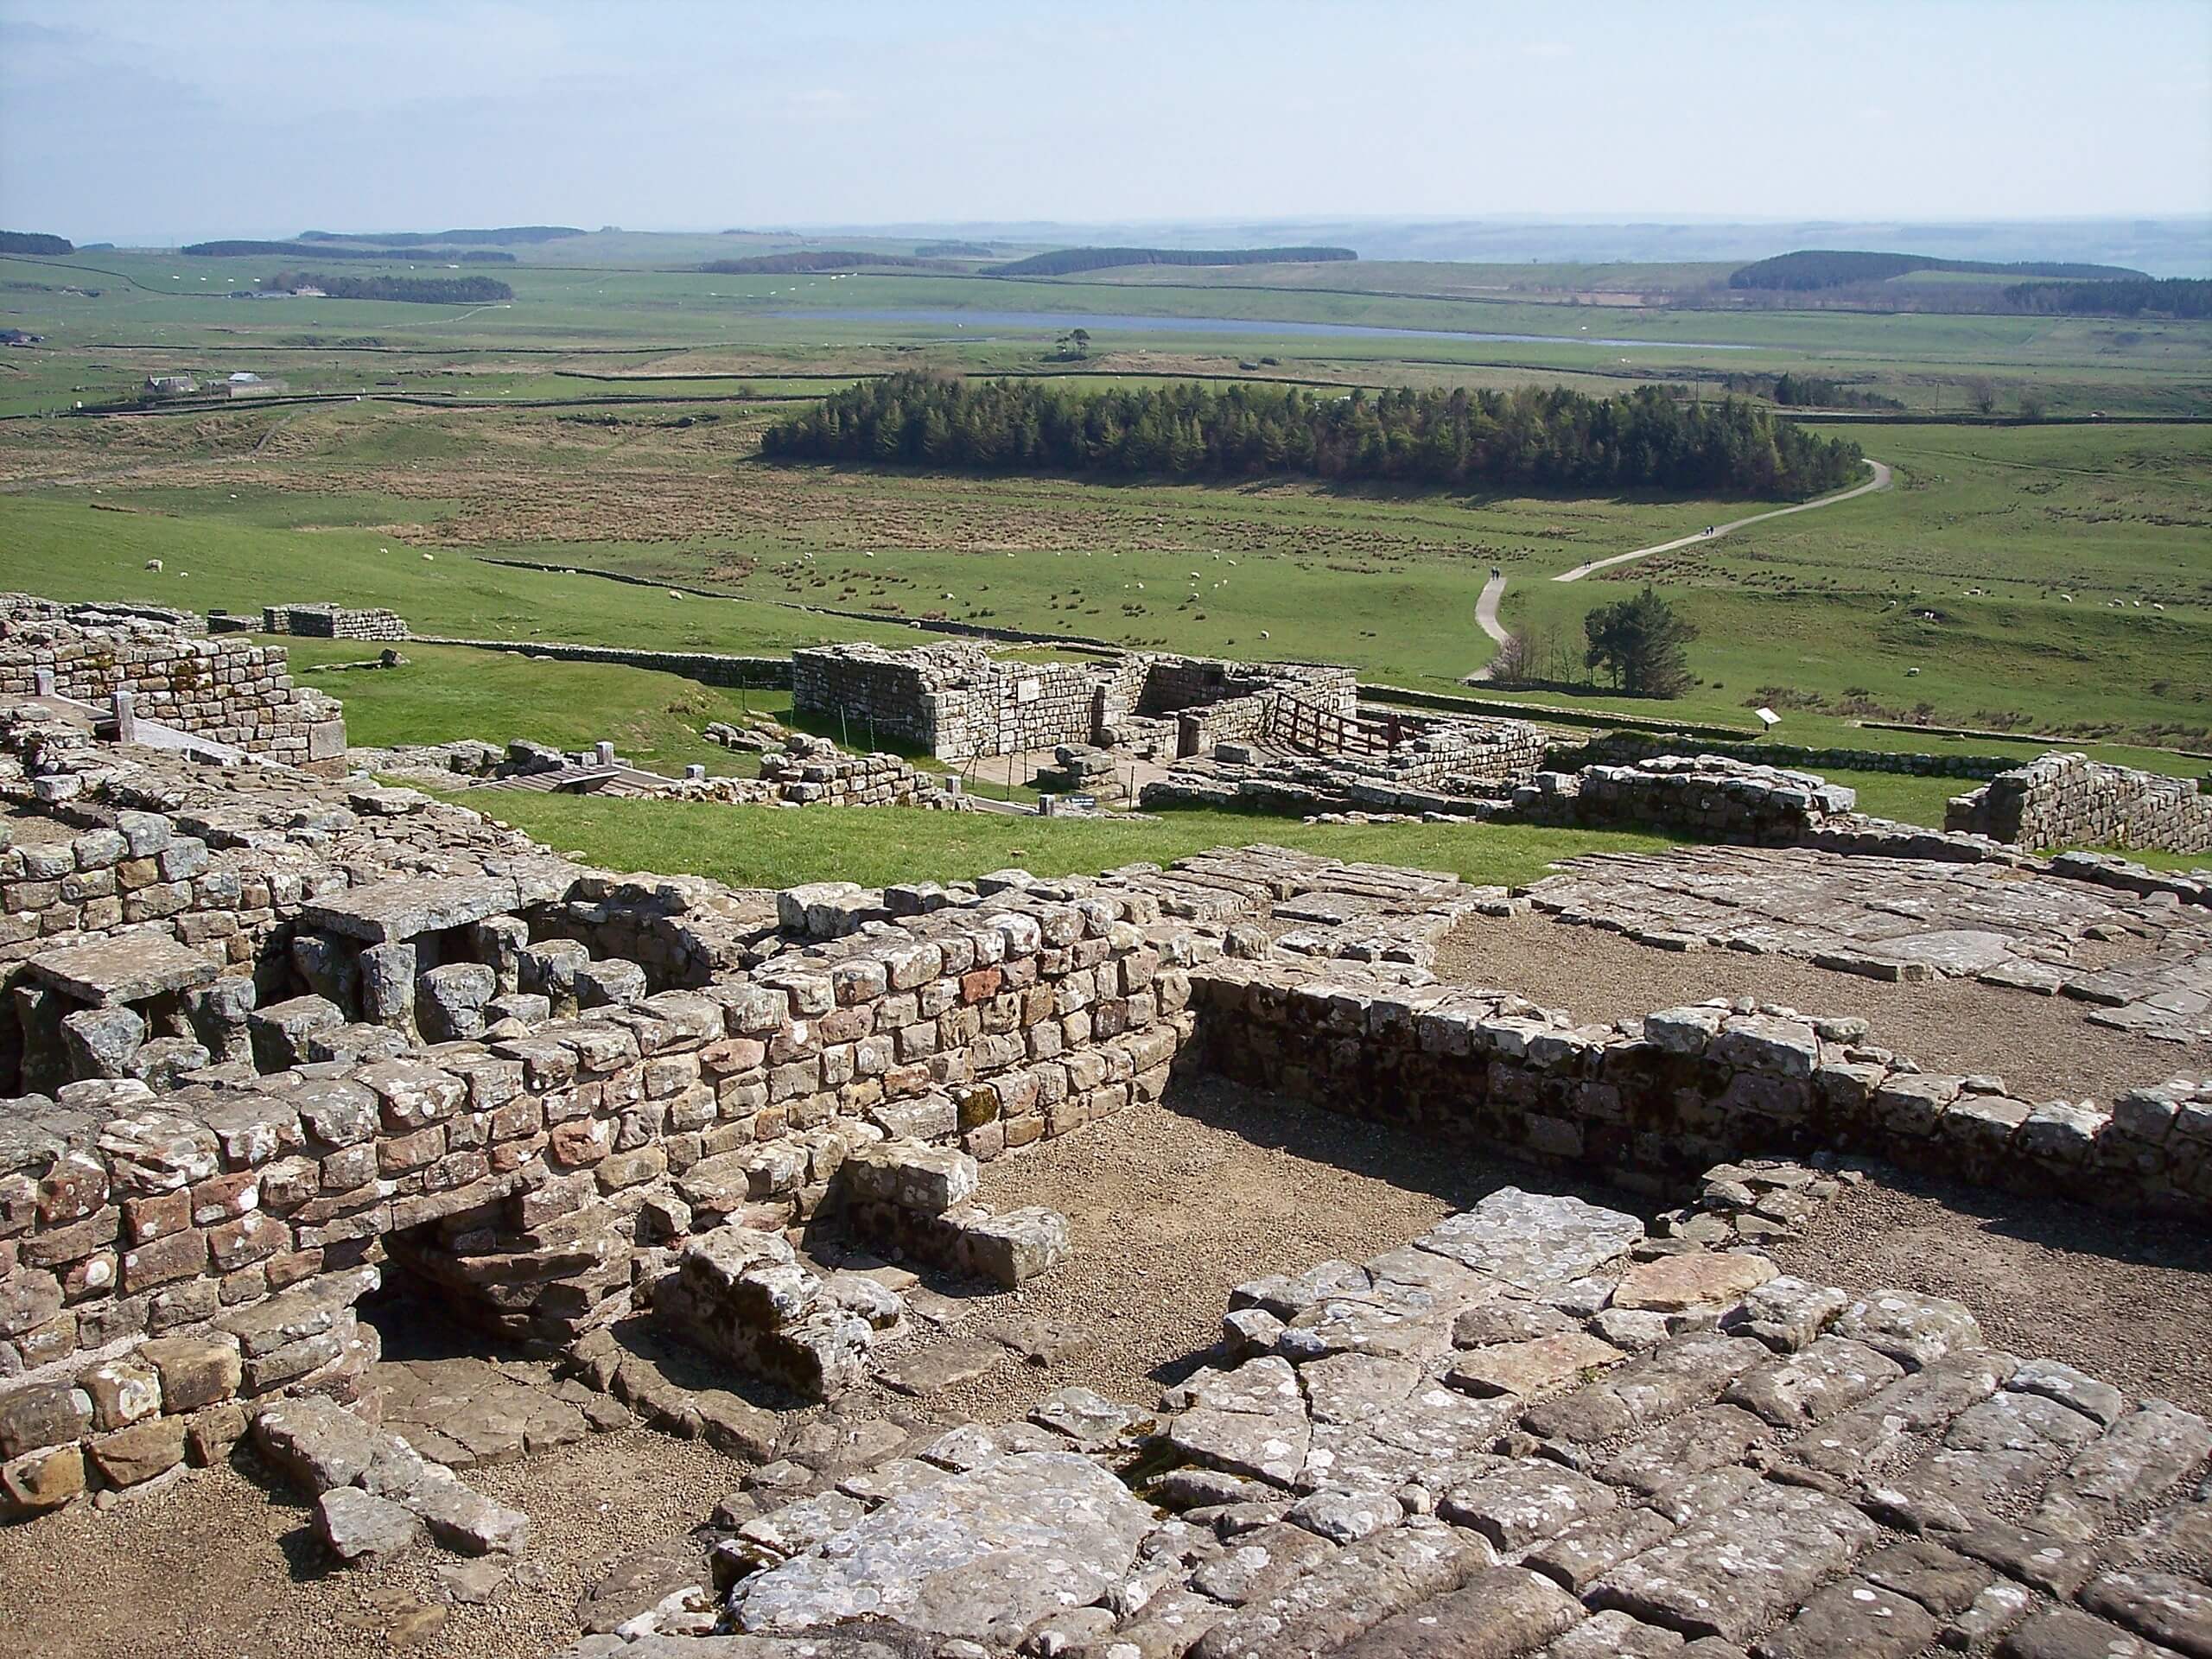 Housesteads Fort and Hadrian’s Wall Walk